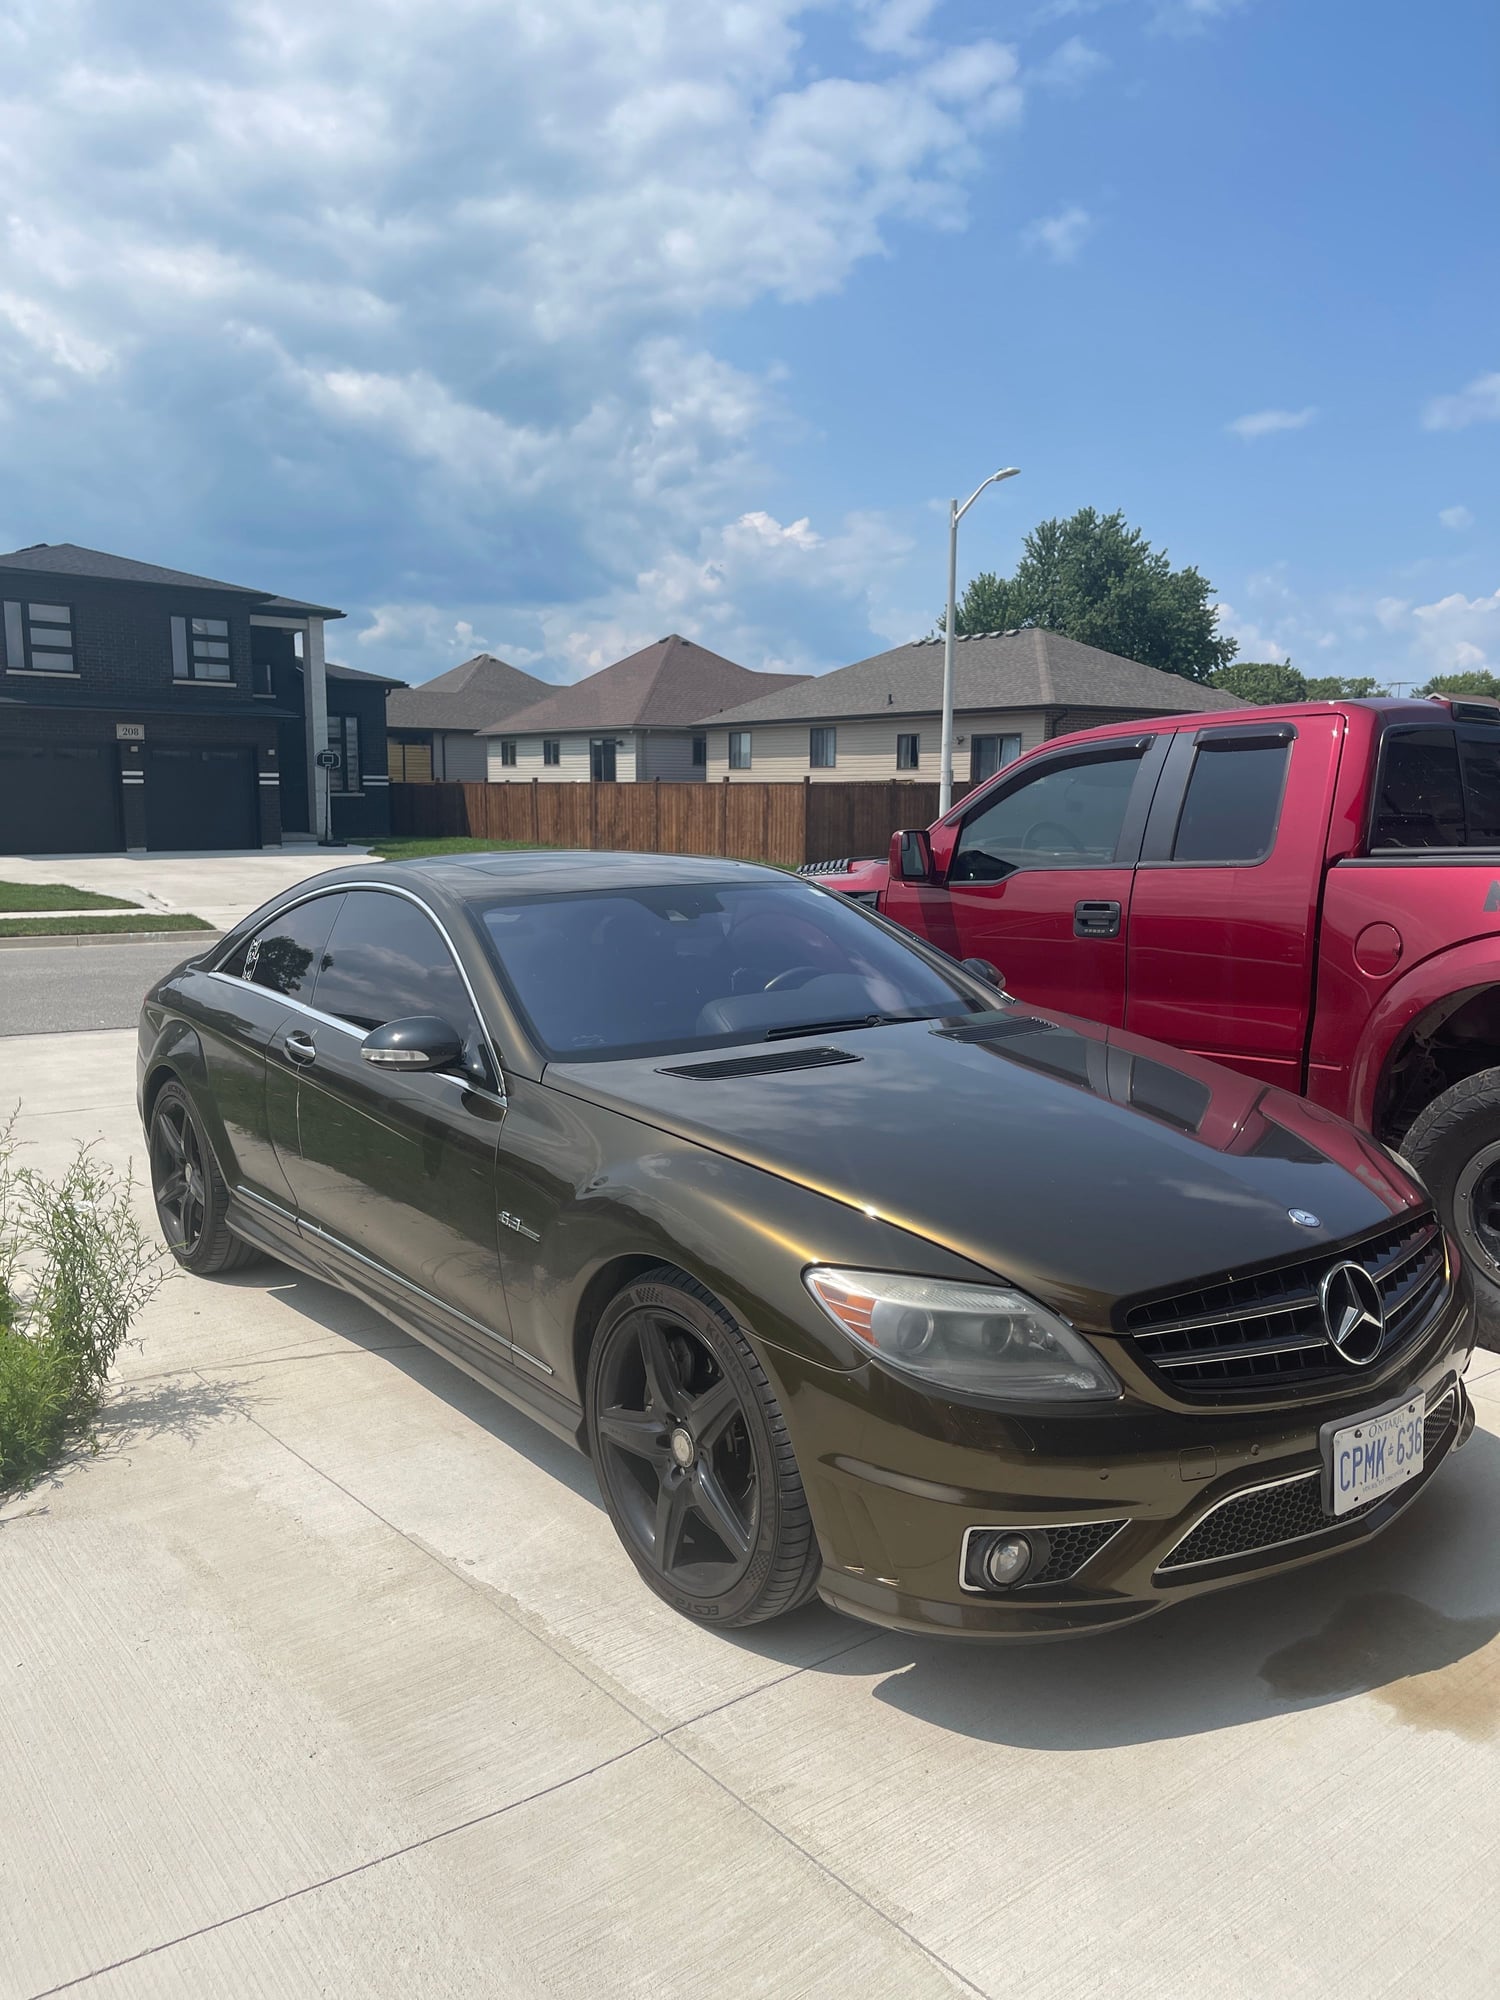 2009 Mercedes-Benz CL63 AMG - My high mile CL63, Whats it worth, taking offers! - Used - VIN WDDEJ77X69A021463 - 205 Miles - 8 cyl - 2WD - Automatic - Coupe - Brown - Belle River, ON N7S3L8, Canada